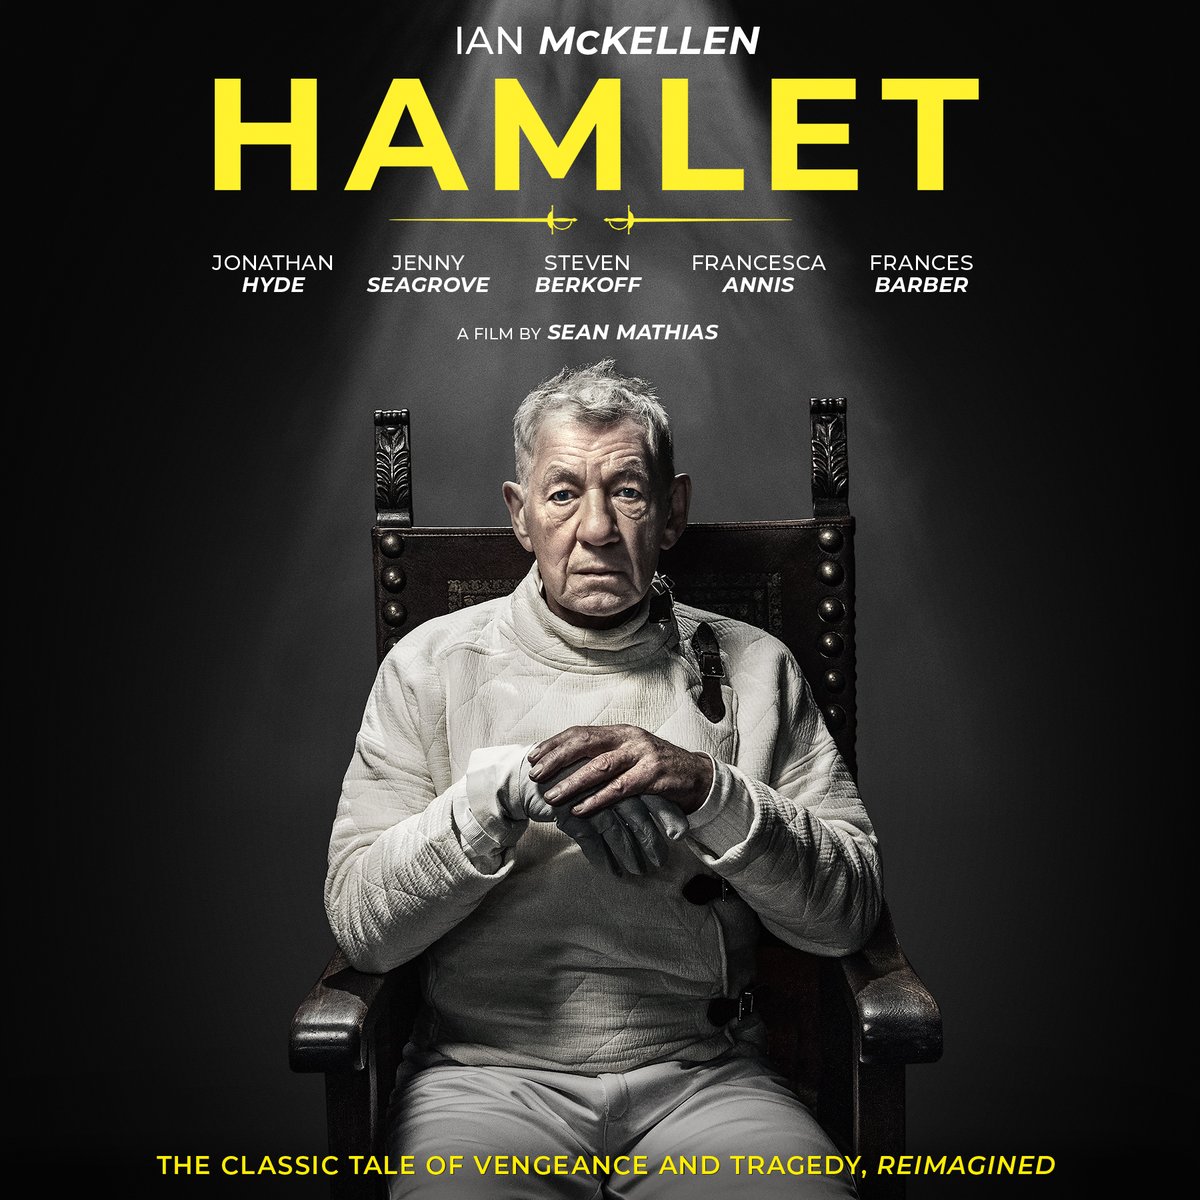 UPCOMING: Ian McKellen in Hamlet Two-time Academy Award nominee and Shakespearian titan, Ian McKellen, stars in this tale of revenge that has stood the test of time, reimagined as a gripping psychological thriller. Sat 18 May, 3.30 | Book now: tinyurl.com/IanMcKellenHam…